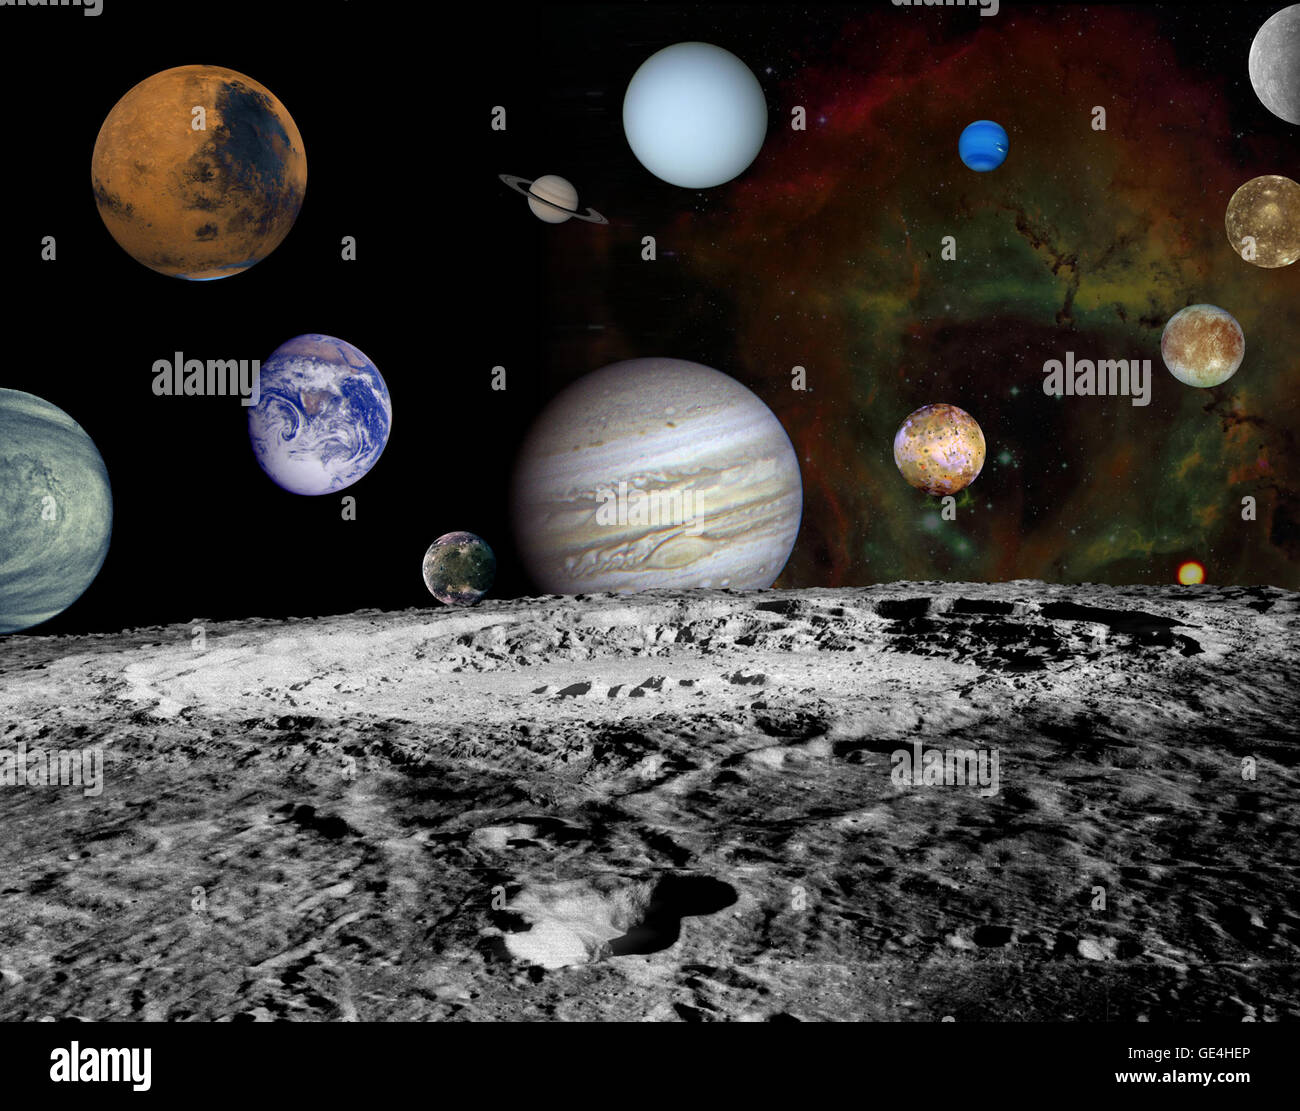 This montage of images taken by the Voyager spacecraft of the planets and four of Jupiter's moons is set against a false-color Rosette Nebula with Earth's moon in the foreground. Studying and mapping Jupiter, Saturn, Uranus, Neptune, and many of their moons, Voyager provided scientists with better images and data than they had ever had before or expected from the program. Although launched sixteen days after Voyager 2, Voyager 1's trajectory was a faster path, arriving at Jupiter in March 1979. Voyager 2 arrived about four months later in July 1979. Both spacecraft were then directed to Saturn Stock Photo